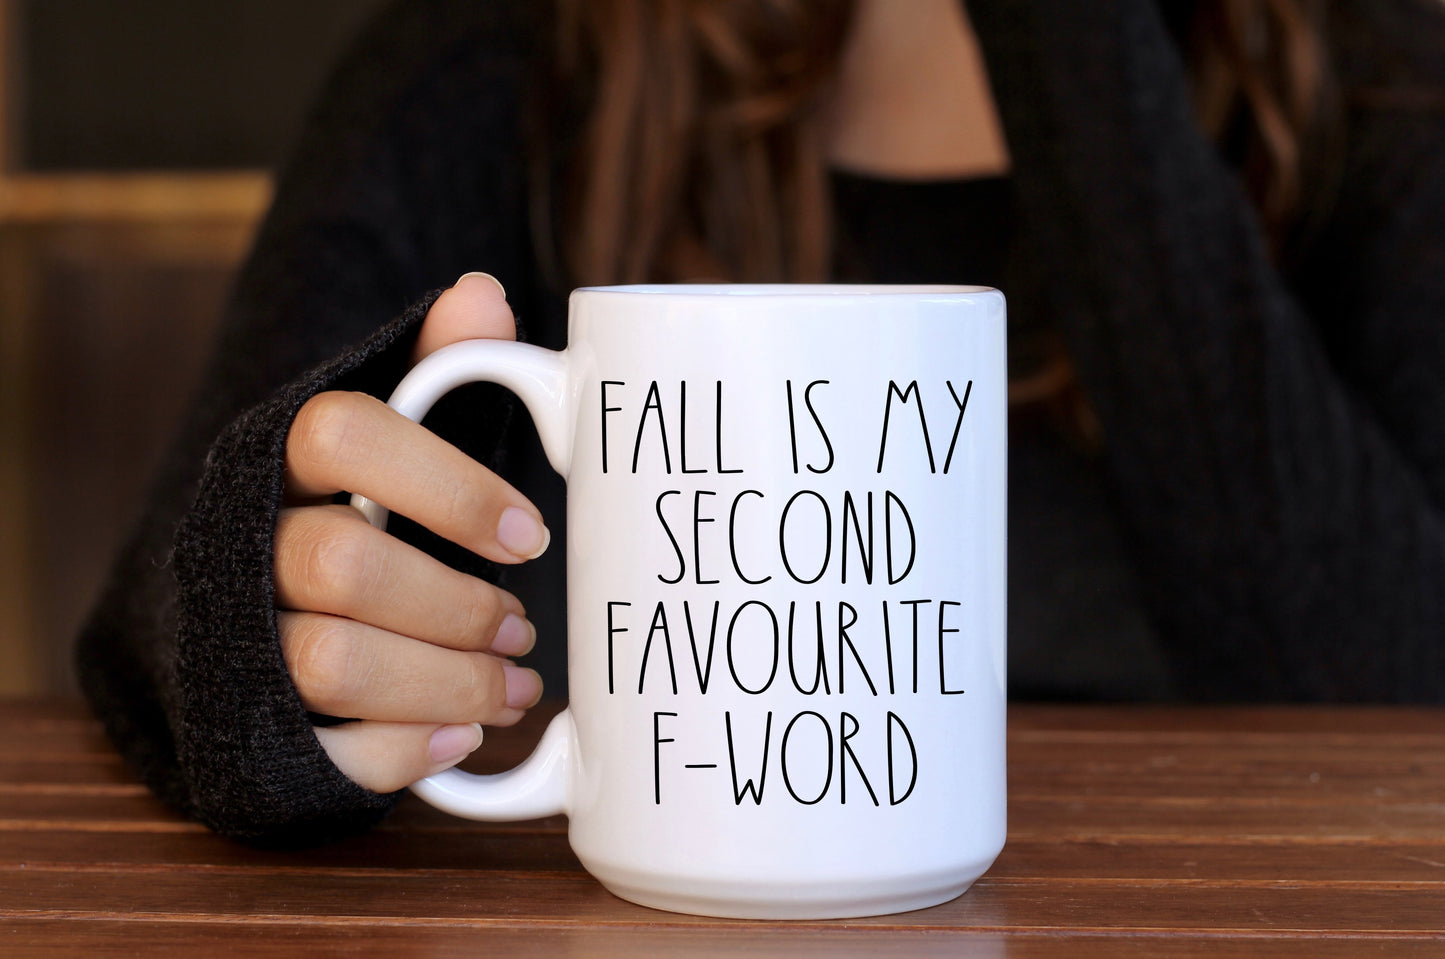 Fall is my second favourite f-word